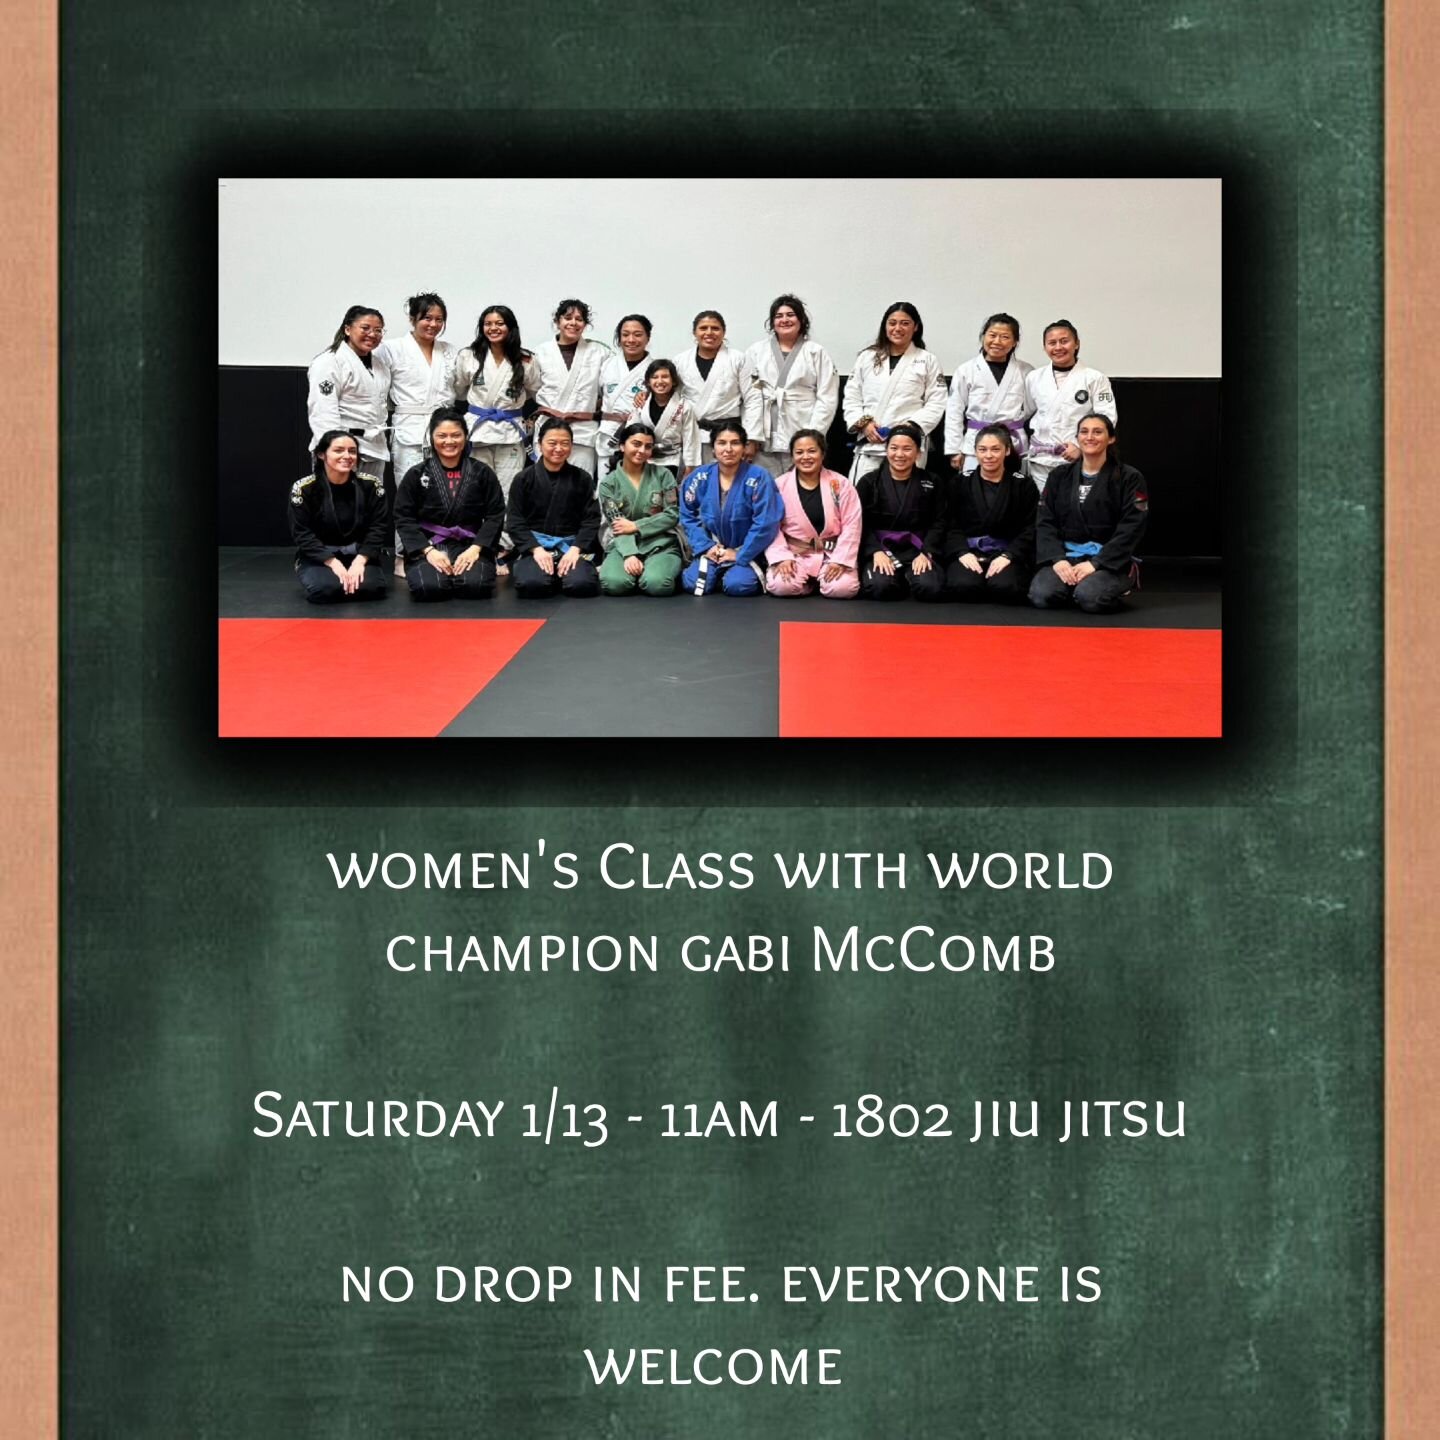 Last minute change . This weekend's Women's Class will be on Saturday NOT Sunday. It will still be at 11am. We hope everyone can still make it. See you there